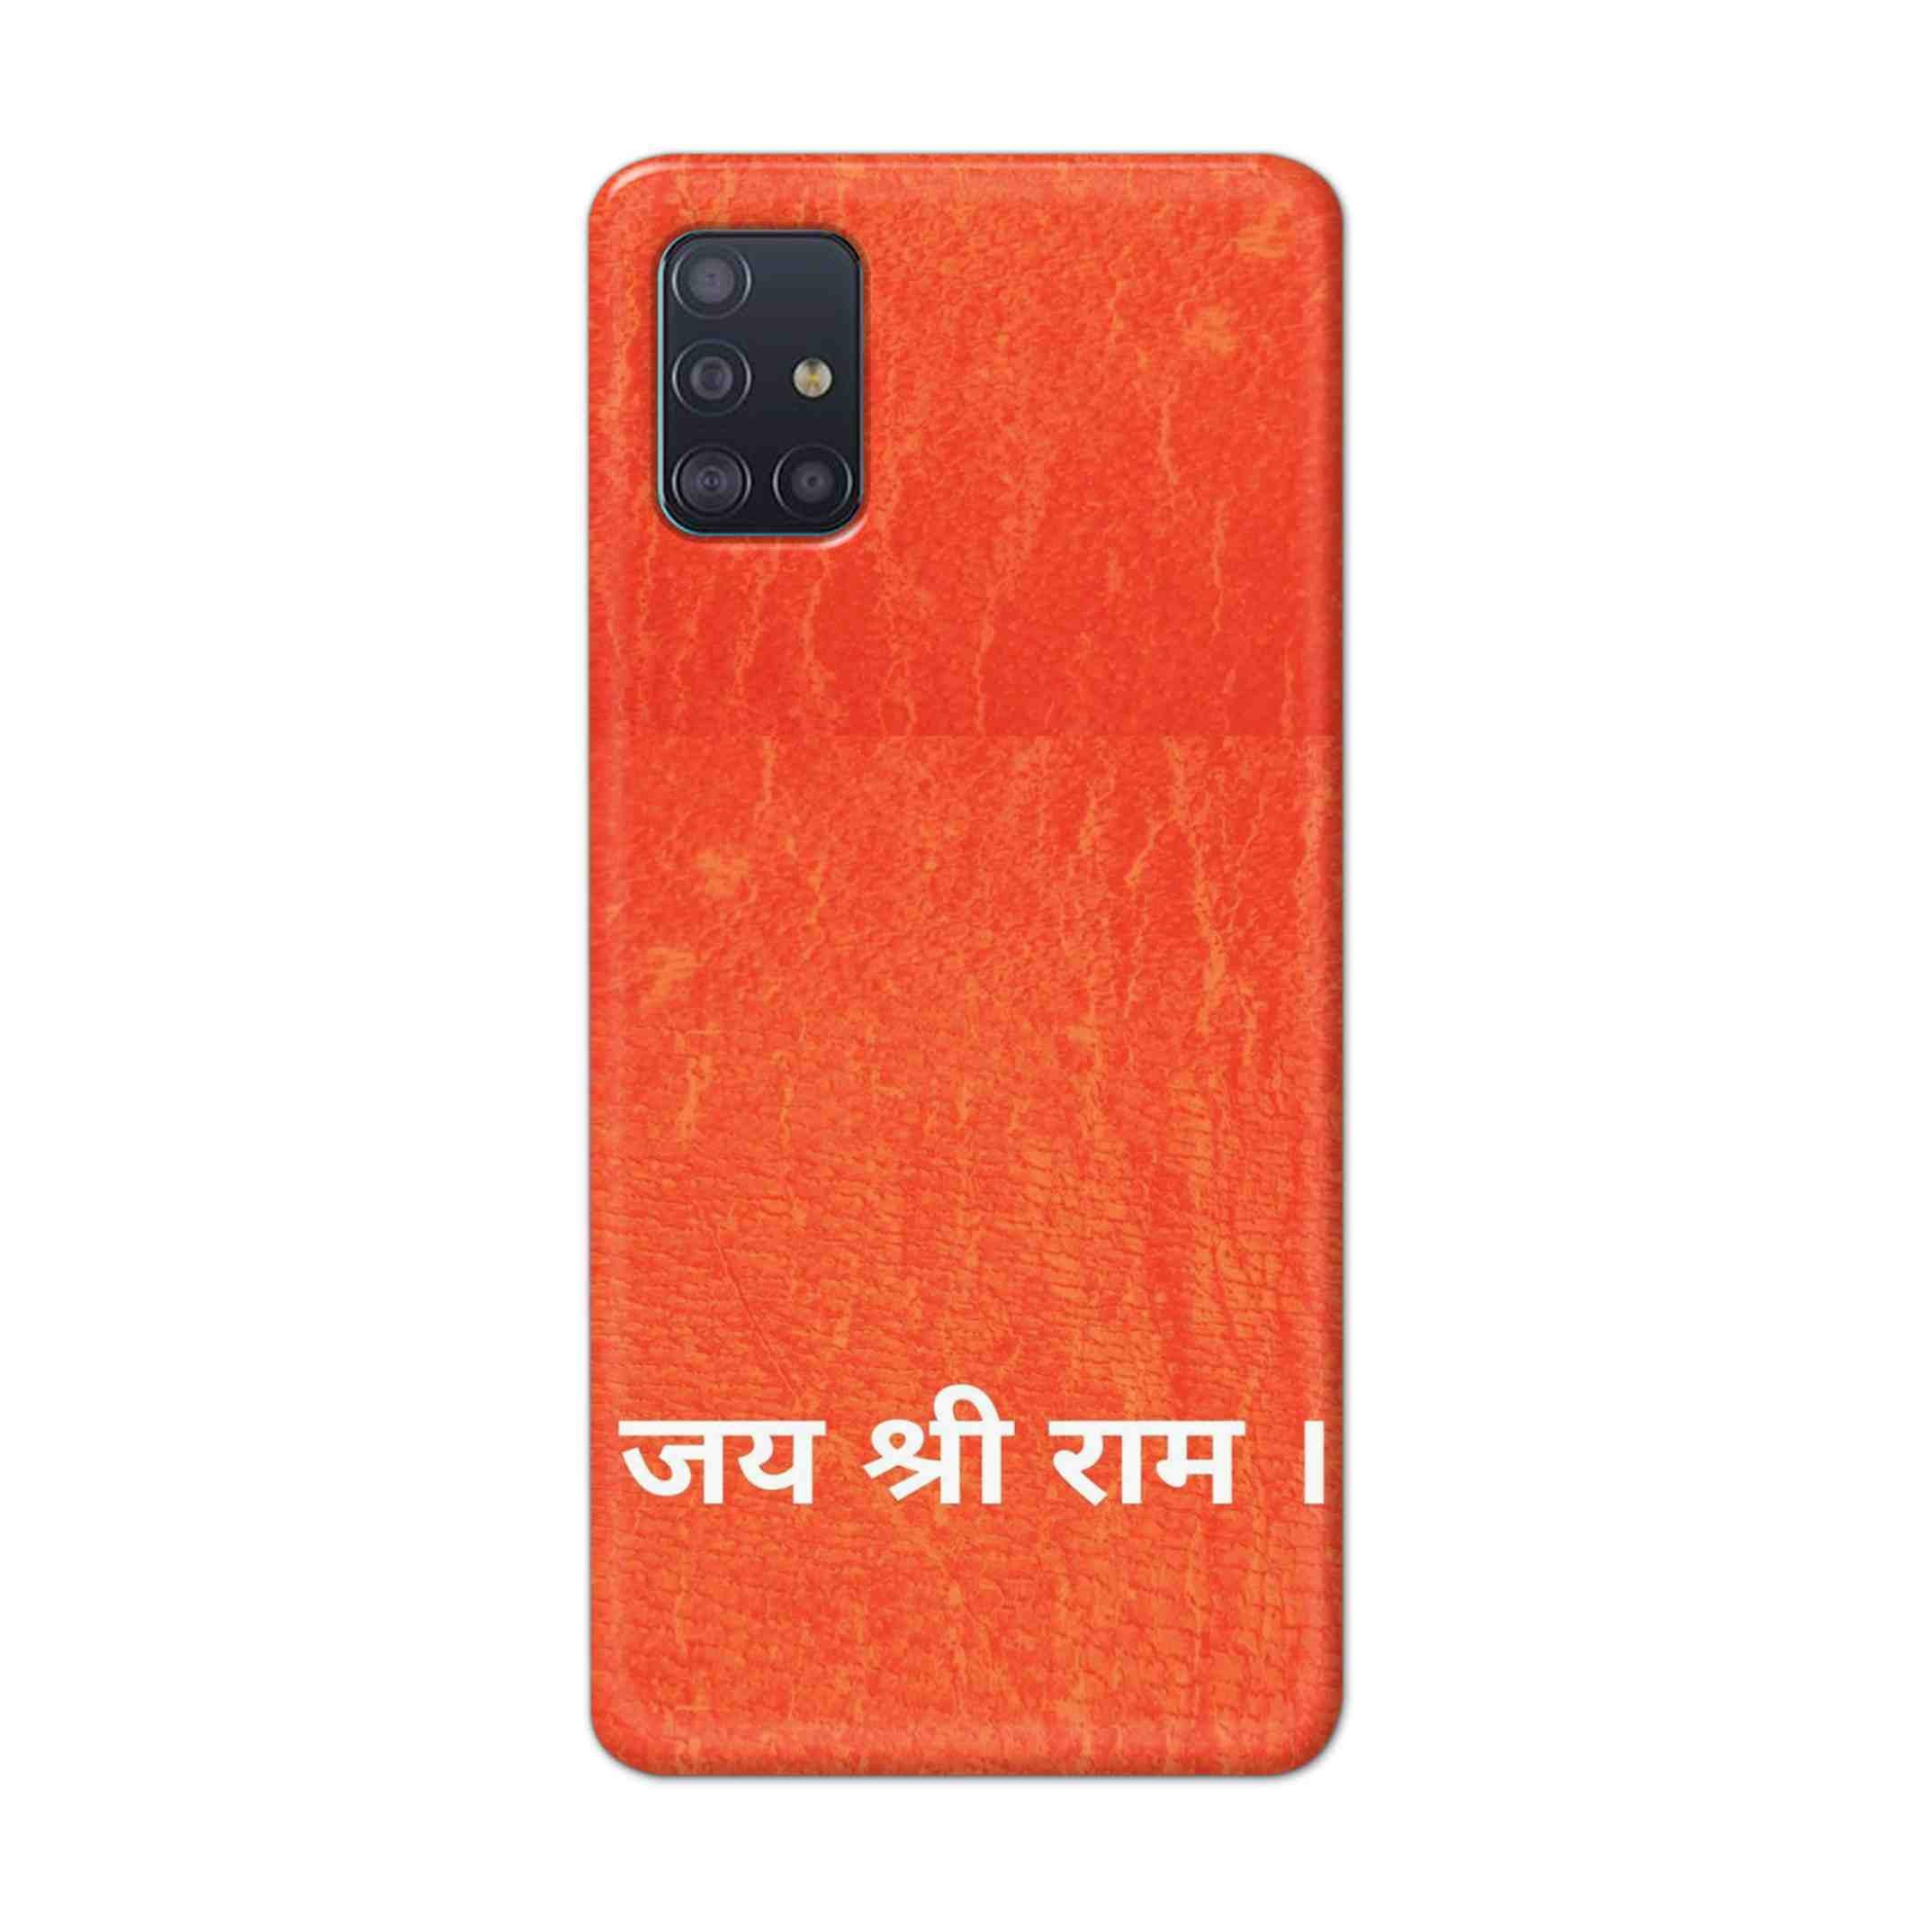 Buy Jai Shree Ram Hard Back Mobile Phone Case Cover For Samsung Galaxy A71 Online